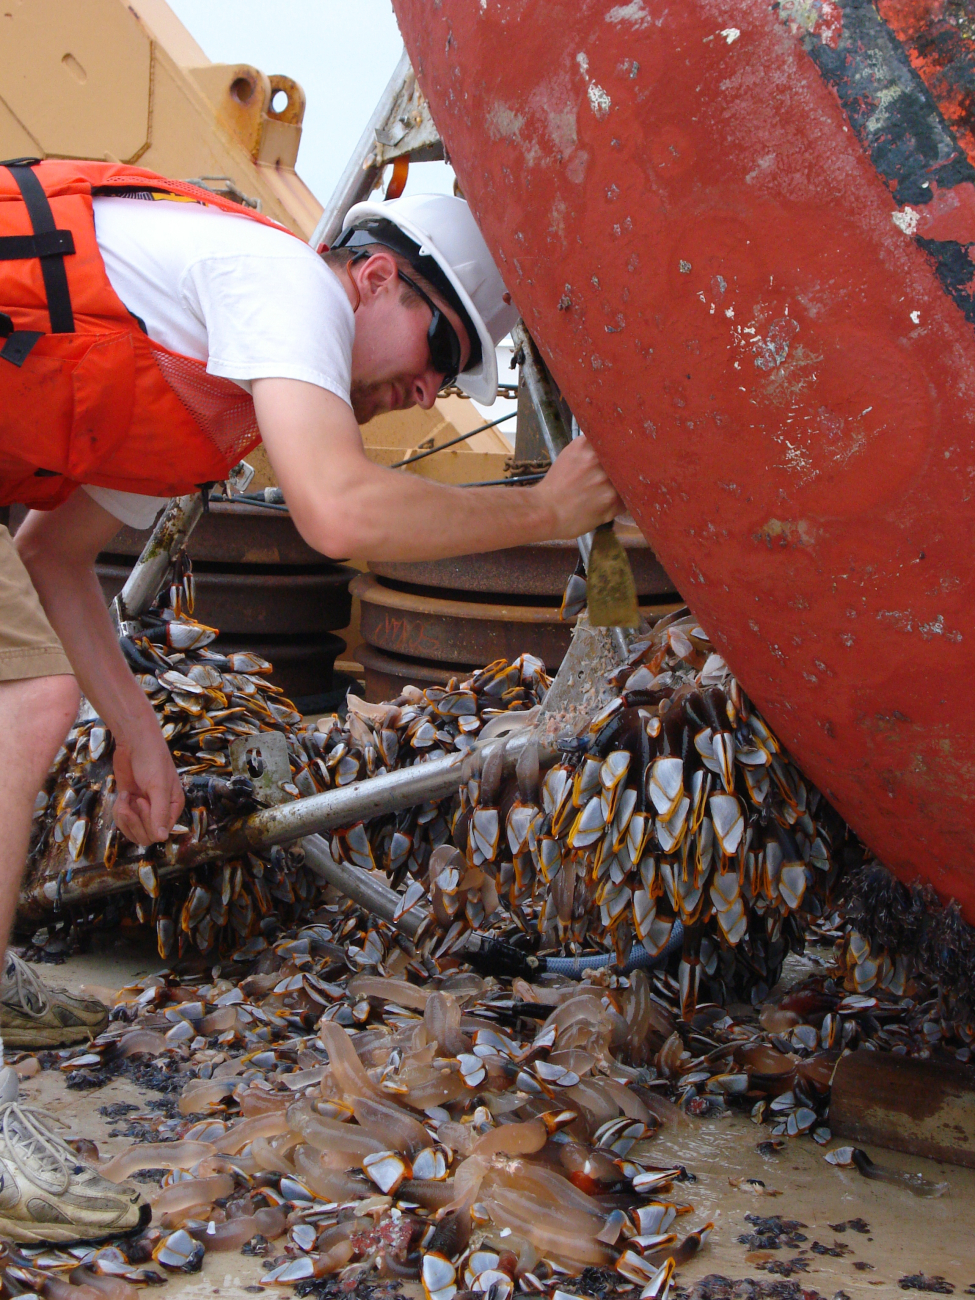 Gooseneck barnacles attached to buoy after year in ocean